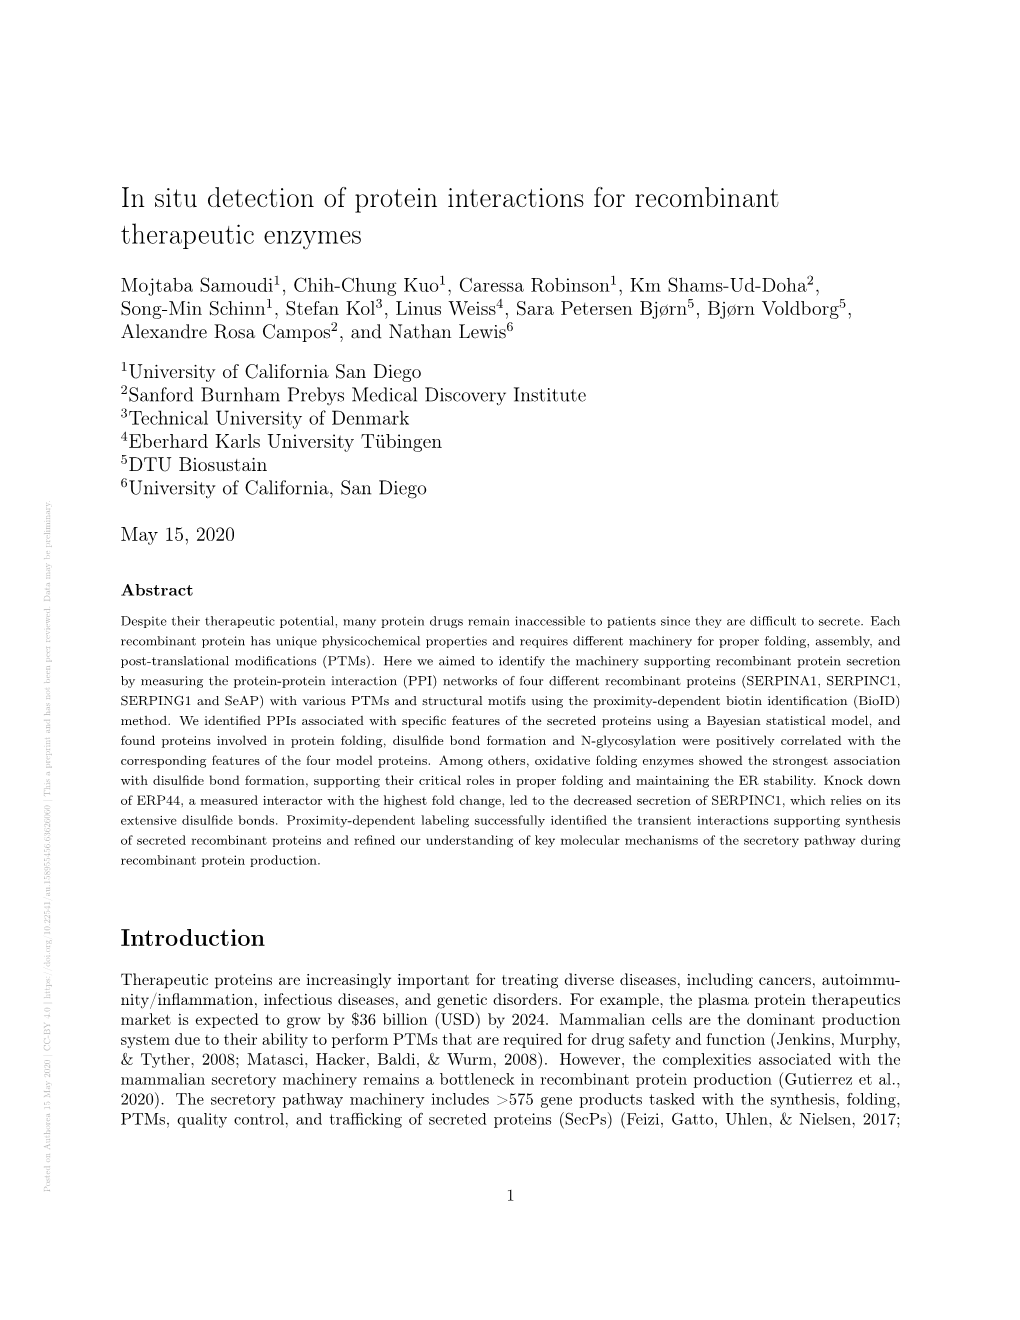 In Situ Detection of Protein Interactions for Recombinant Therapeutic Enzymes